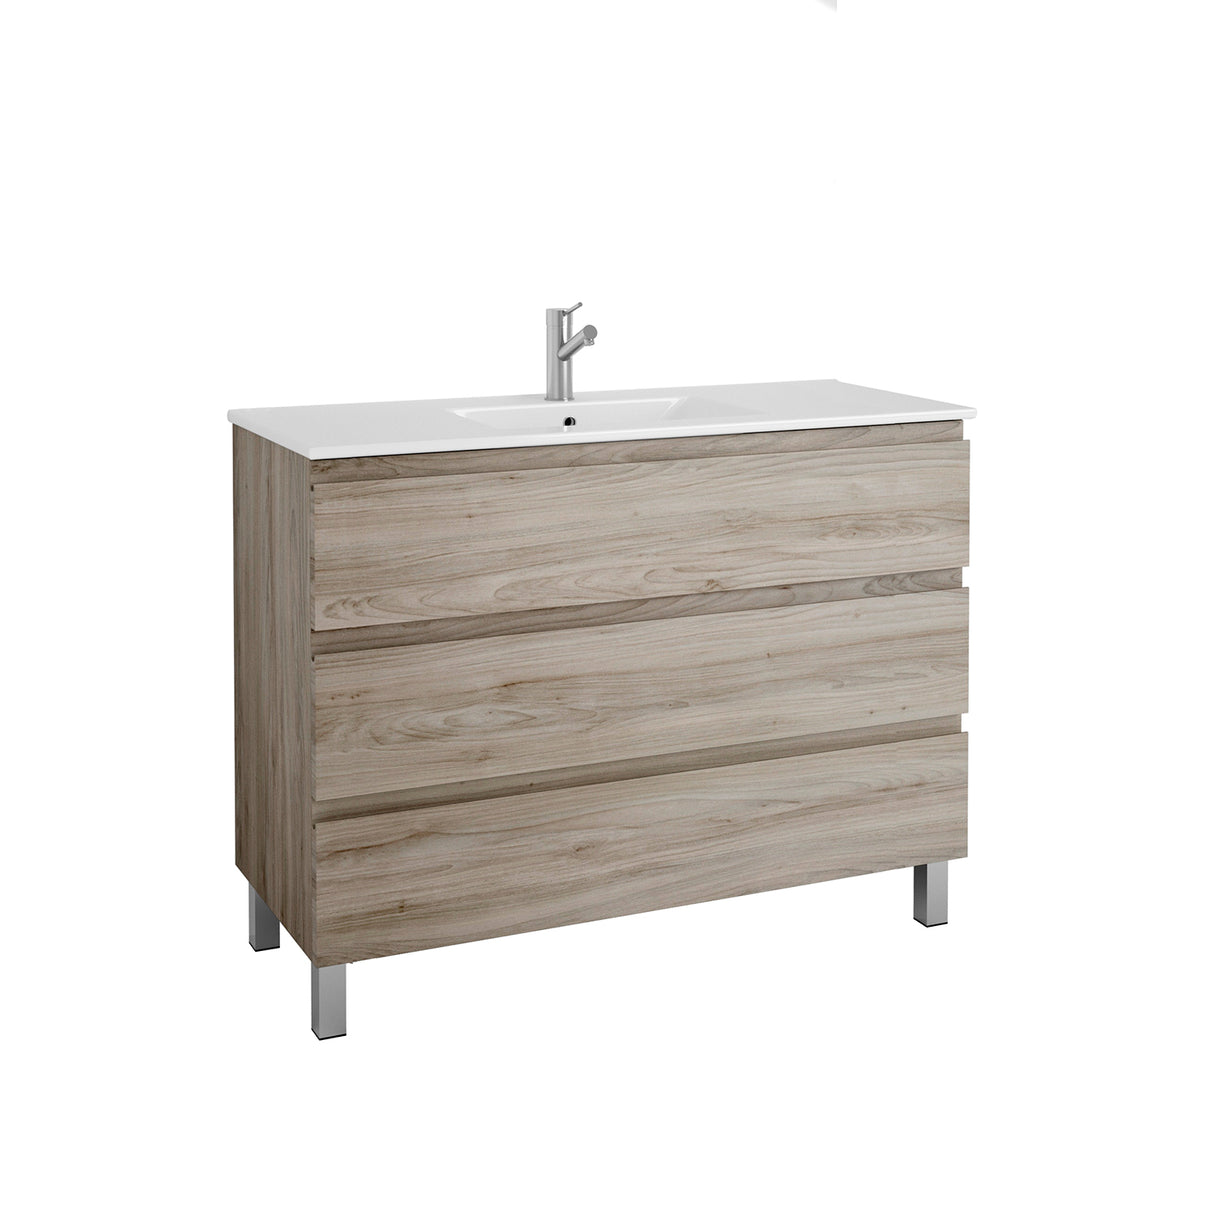 DAX Costa Engineered Wood Vanity Cabinet and Porcelain Basin, Pine and Onyx DAX-COS014812-ONX